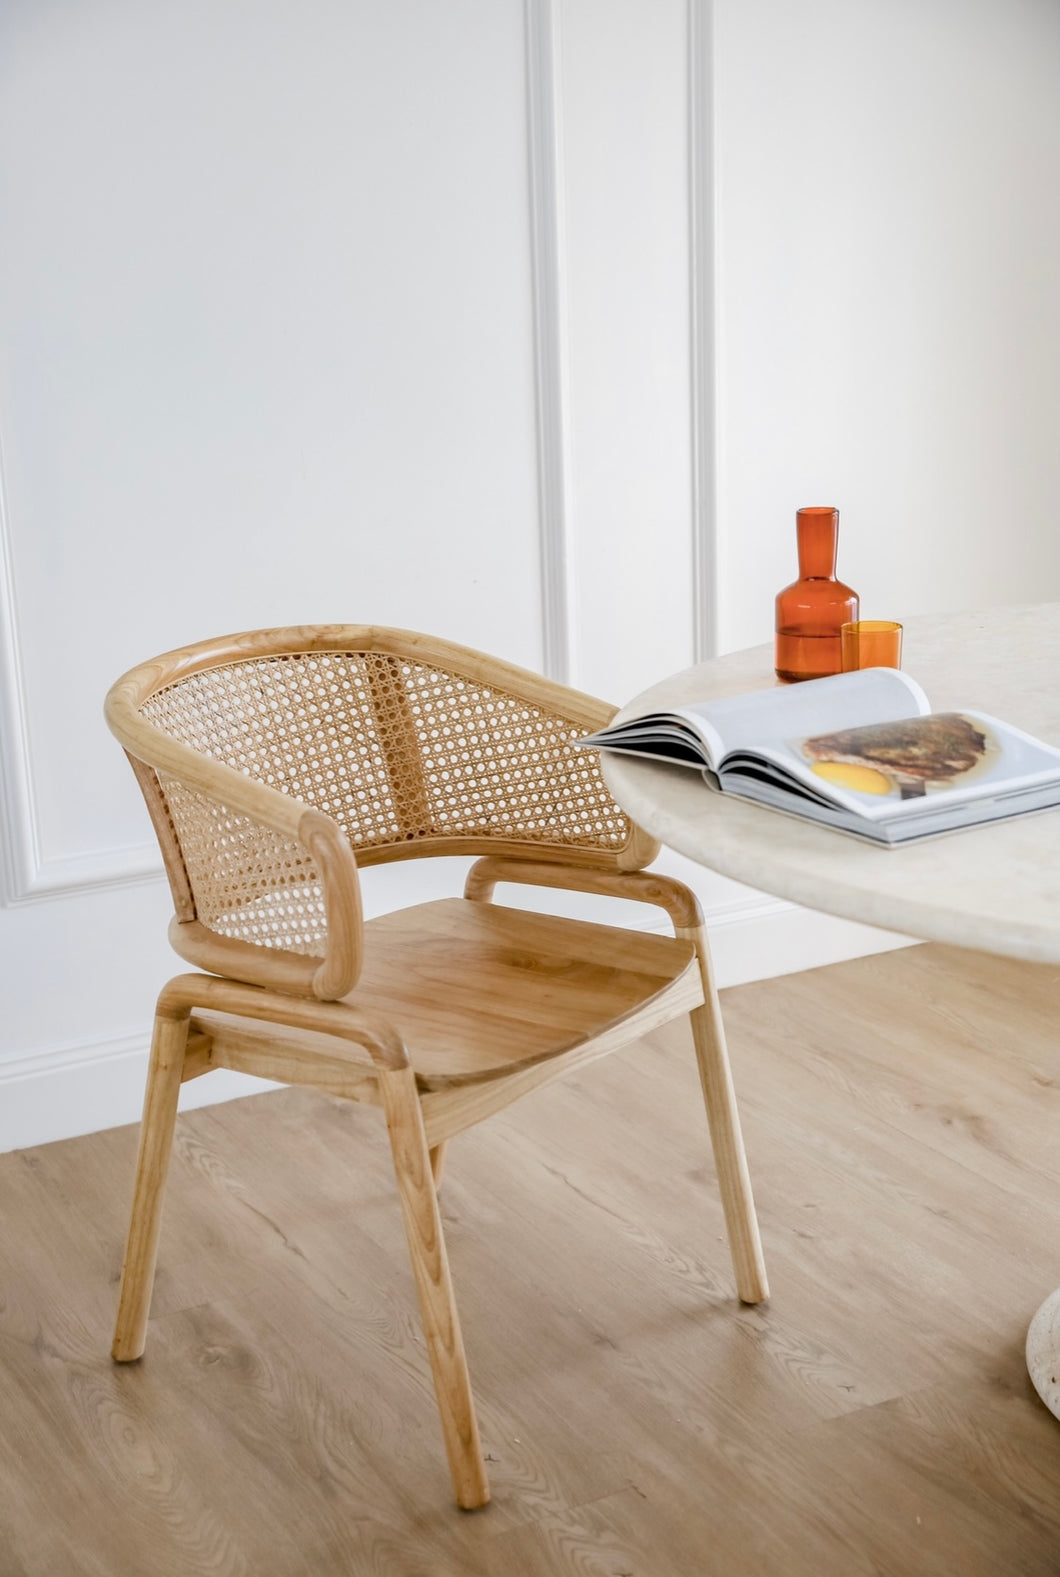 Kahli dining chair - pre order arriving early March